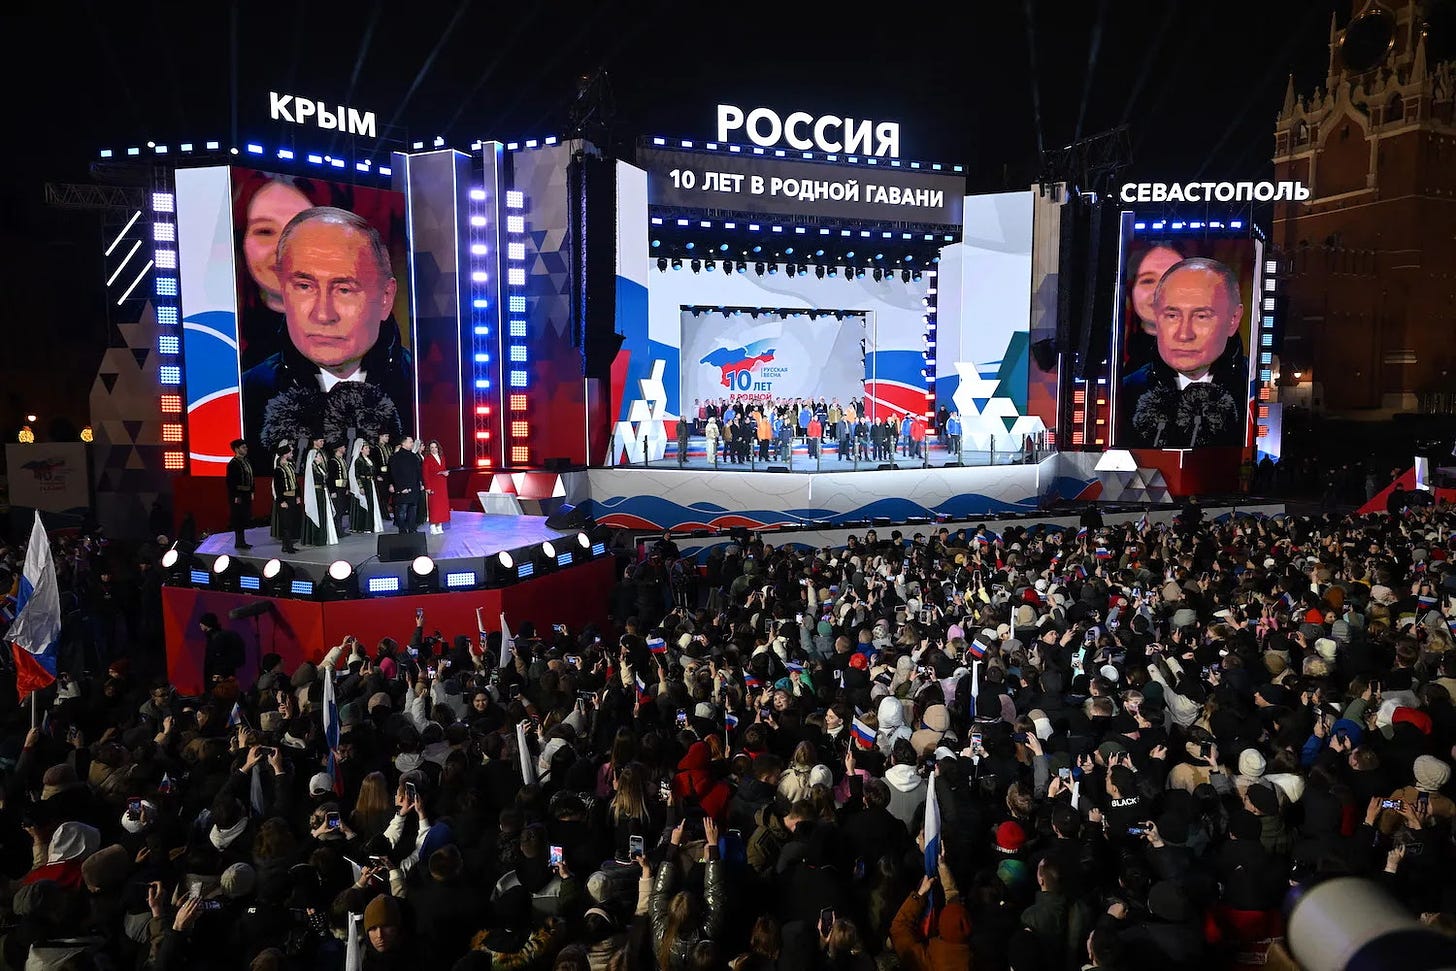 Russian President Vladimir Putin addresses a crowd in Moscow.